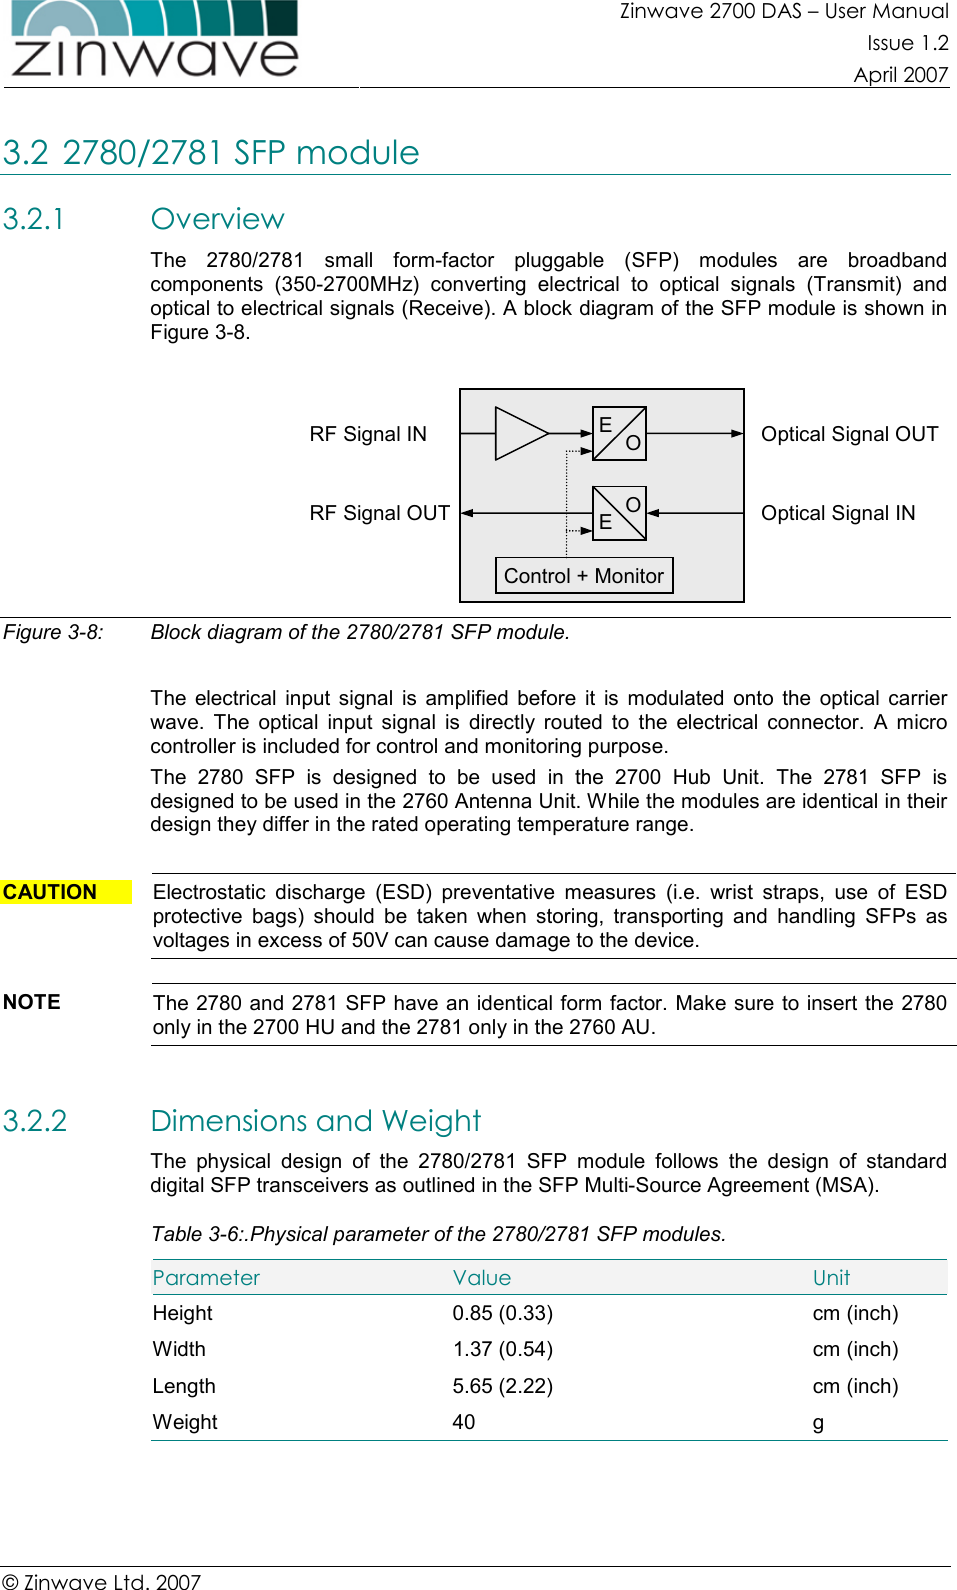 Zinwave 2700 DAS – User Manual Issue 1.2  April 2007  © Zinwave Ltd. 2007  3.2 2780/2781 SFP module 3.2.1 Overview The  2780/2781  small  form-factor  pluggable  (SFP)  modules  are  broadband components  (350-2700MHz)  converting  electrical  to  optical  signals  (Transmit)  and optical to electrical signals (Receive). A block diagram of the SFP module is shown in Figure 3-8.   Figure 3-8:  Block diagram of the 2780/2781 SFP module.  The  electrical  input  signal  is  amplified  before  it  is  modulated  onto  the  optical  carrier wave.  The  optical  input  signal  is  directly  routed  to  the  electrical  connector.  A  micro controller is included for control and monitoring purpose. The  2780  SFP  is  designed  to  be  used  in  the  2700  Hub  Unit.  The  2781  SFP  is designed to be used in the 2760 Antenna Unit. While the modules are identical in their design they differ in the rated operating temperature range.  CAUTION  Electrostatic  discharge  (ESD)  preventative  measures  (i.e.  wrist  straps,  use  of  ESD protective  bags)  should  be  taken  when  storing,  transporting  and  handling  SFPs  as voltages in excess of 50V can cause damage to the device.  NOTE  The 2780 and 2781 SFP have an identical form factor. Make sure to insert the 2780 only in the 2700 HU and the 2781 only in the 2760 AU.  3.2.2 Dimensions and Weight The  physical  design  of  the  2780/2781  SFP  module  follows  the  design  of  standard digital SFP transceivers as outlined in the SFP Multi-Source Agreement (MSA). Table 3-6:.Physical parameter of the 2780/2781 SFP modules. Parameter  Value  Unit Height  0.85 (0.33)  cm (inch) Width  1.37 (0.54)  cm (inch) Length  5.65 (2.22)  cm (inch) Weight  40  g  Optical Signal OUT E O RF Signal IN E O RF Signal OUT Optical Signal IN Control + Monitor 